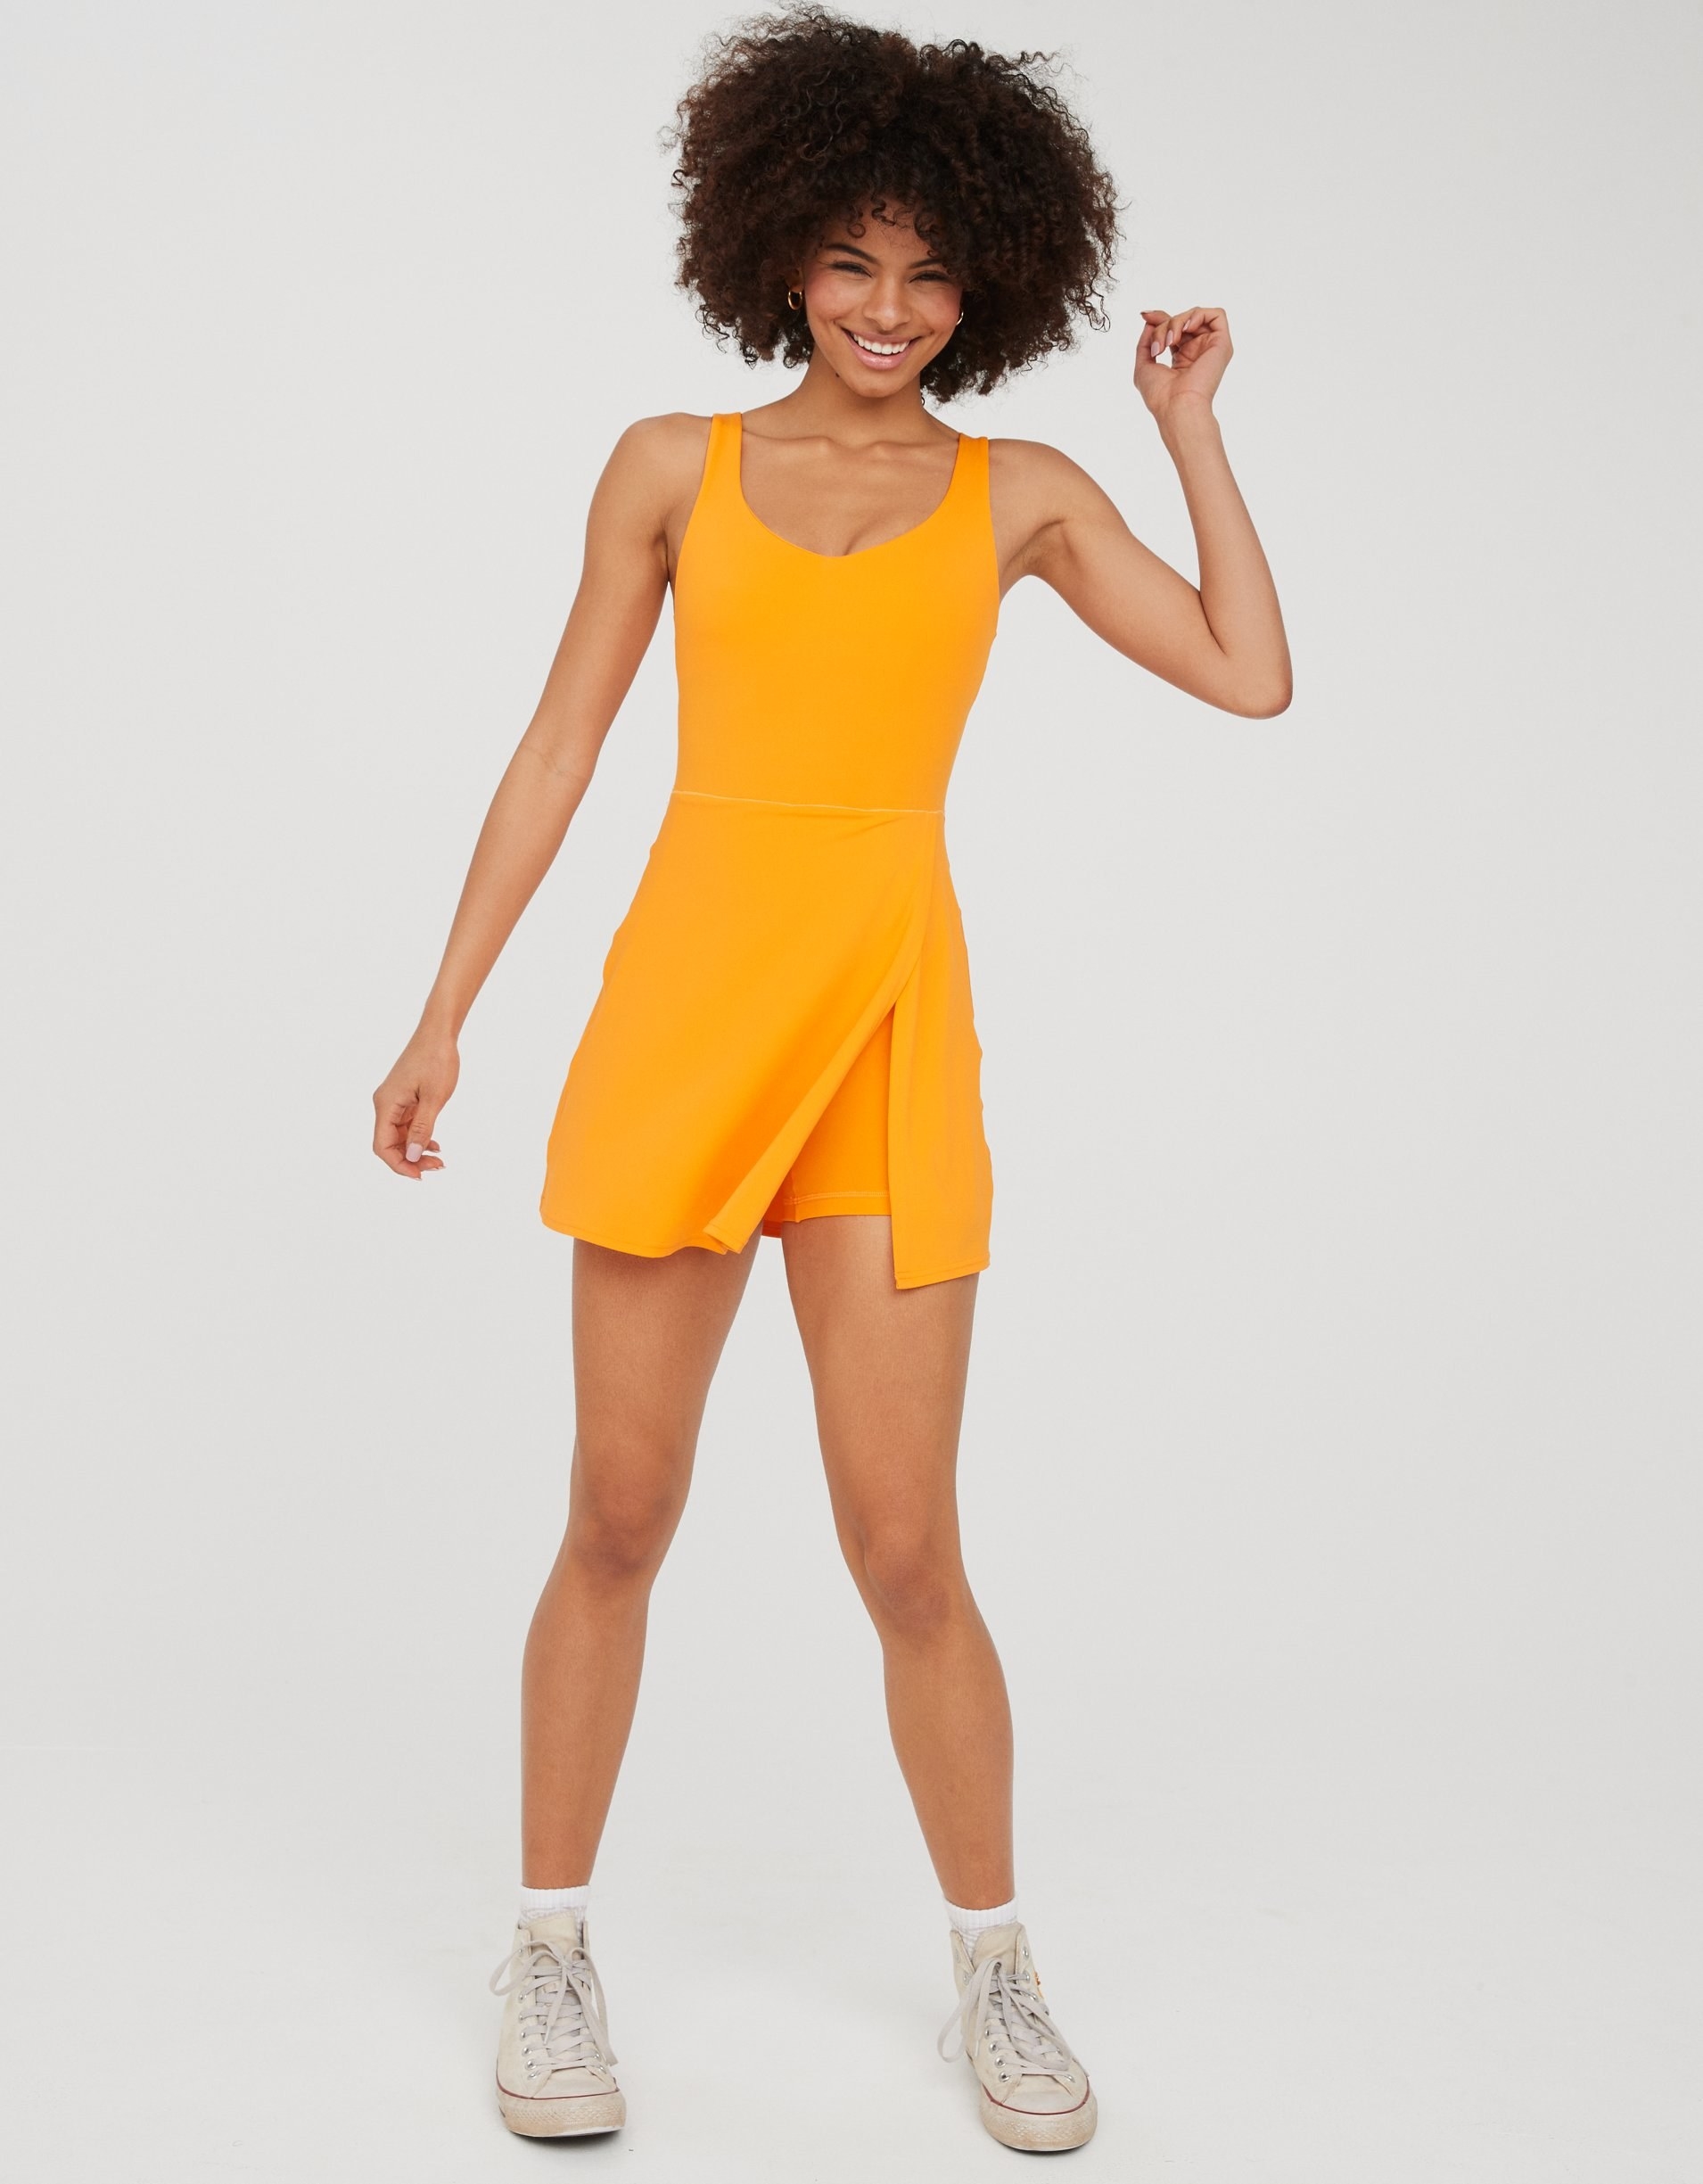 model in bright yellow scoop-neck tank dress with built-in shorts and a slit up its skirt